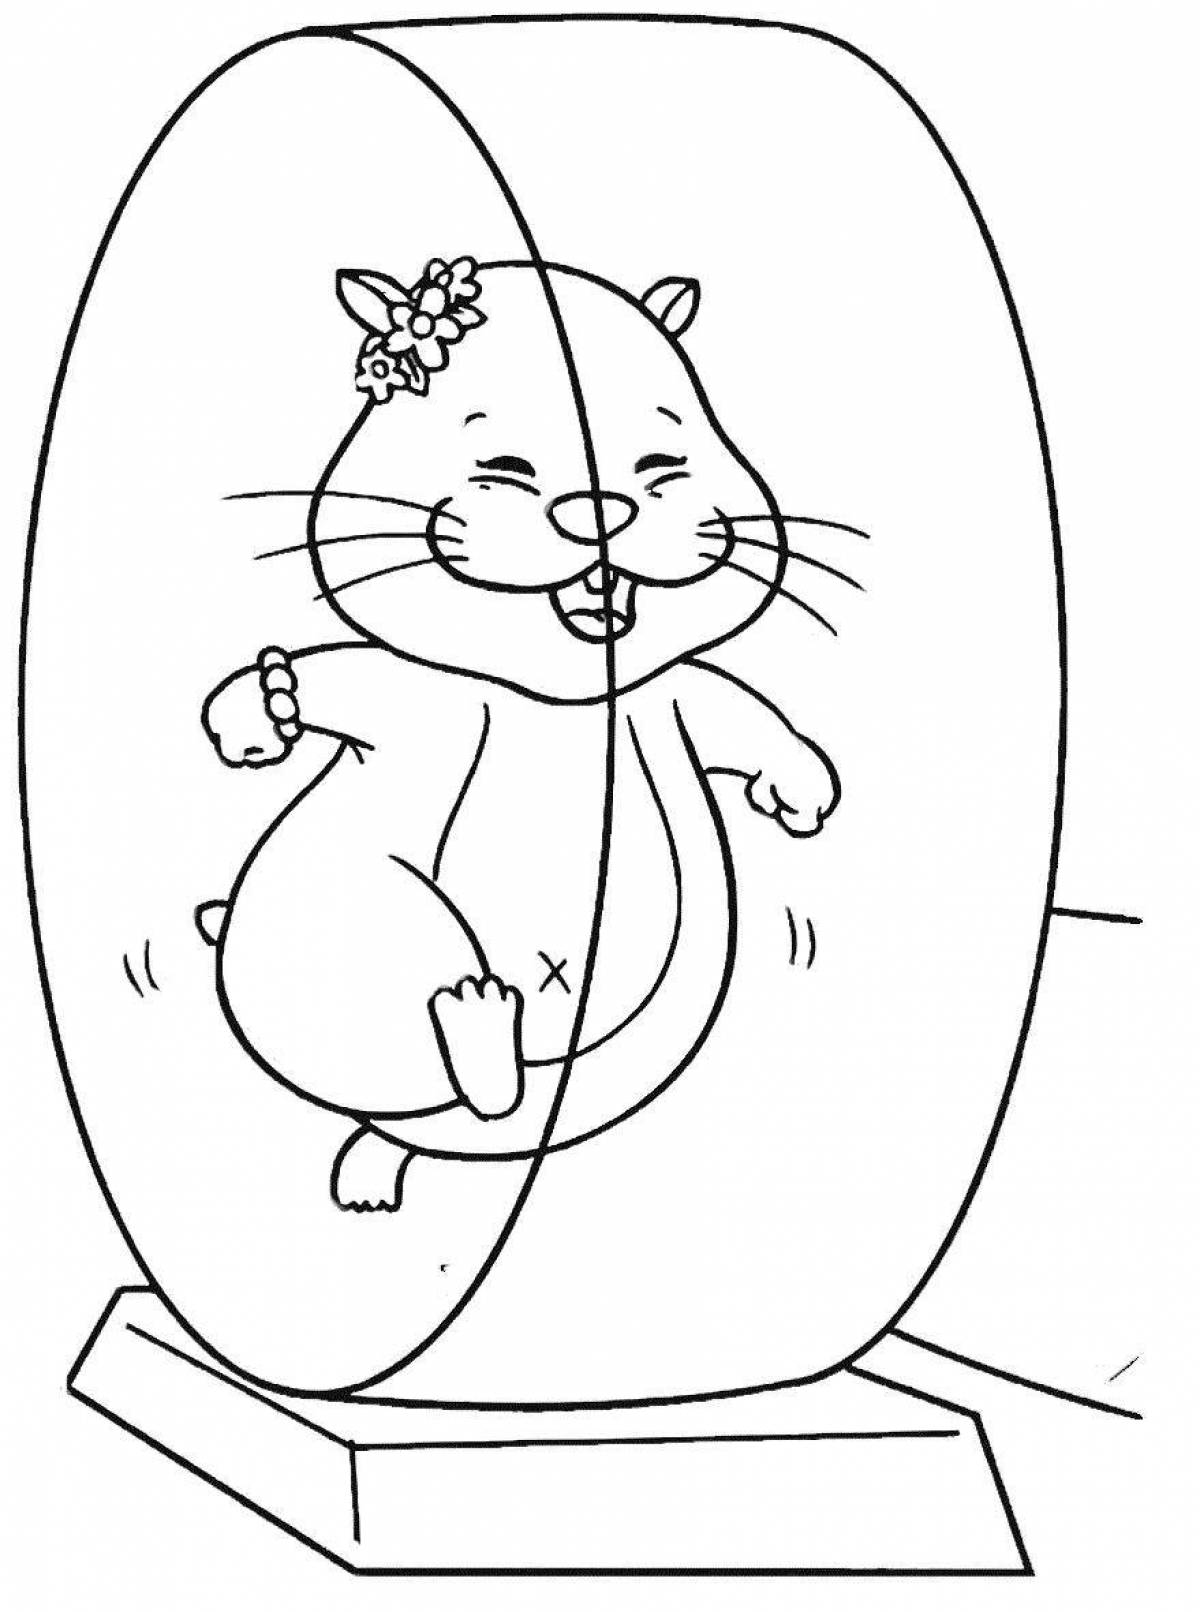 Coloring page adorable hamster in a cage